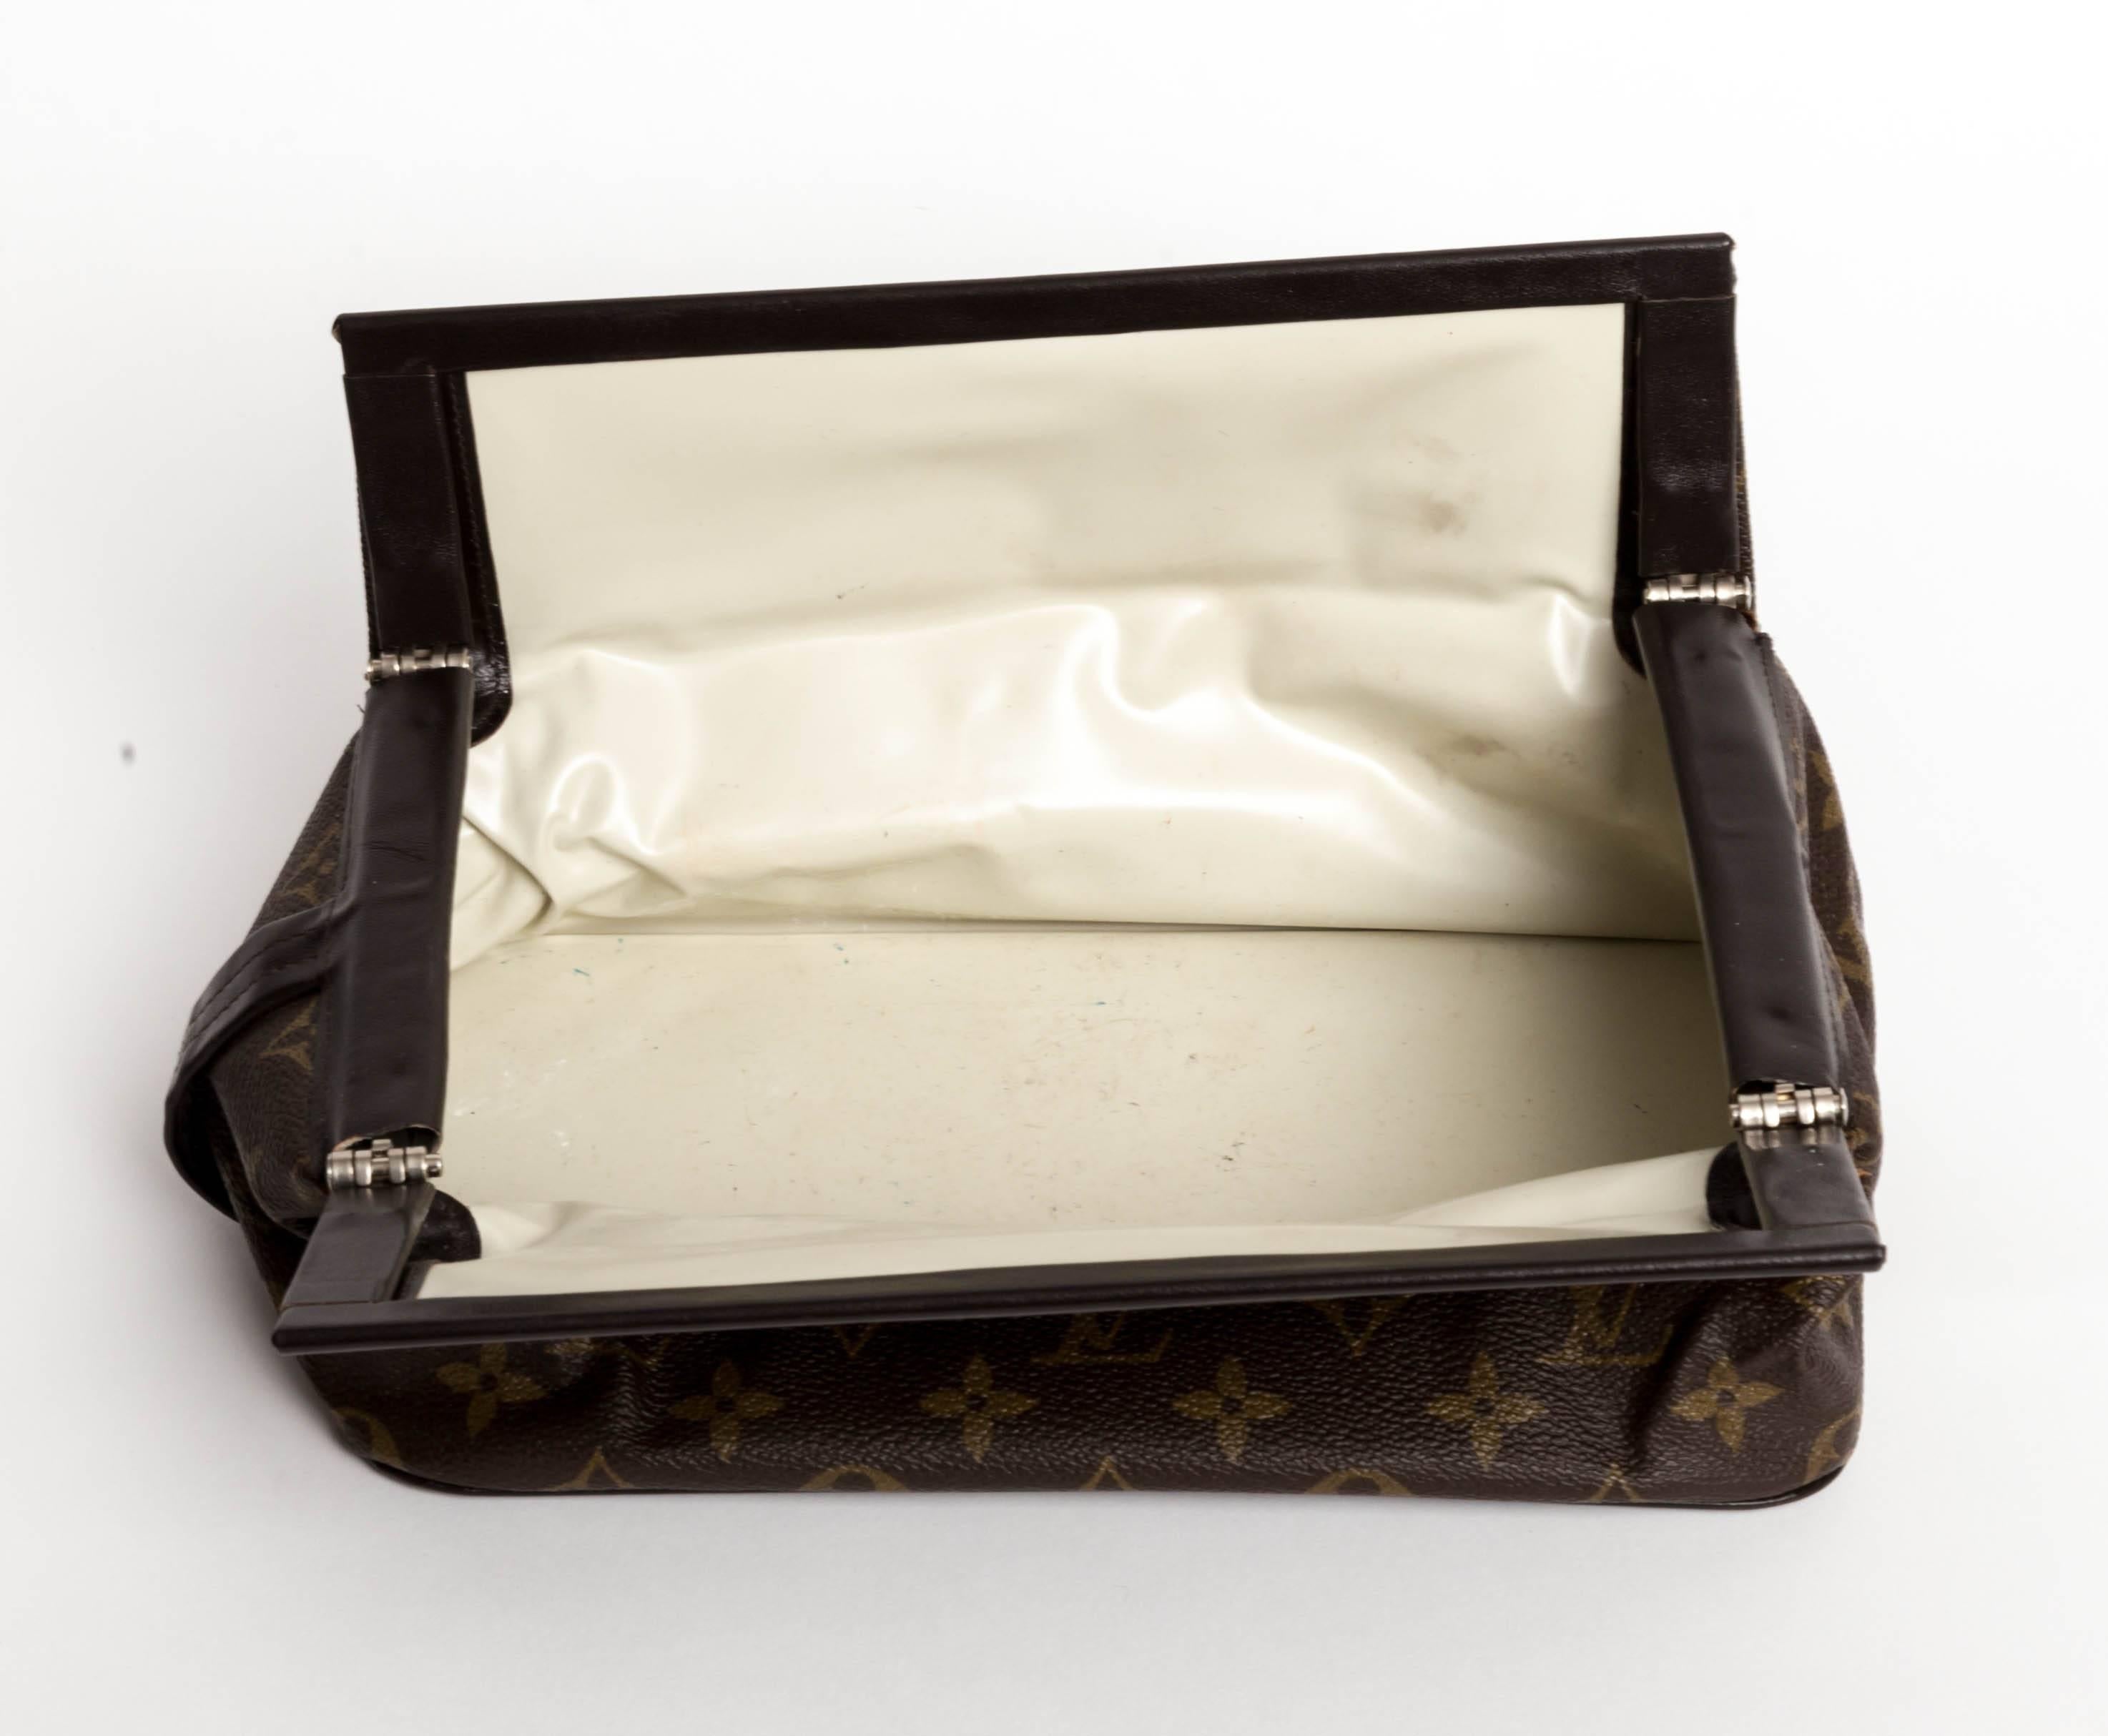 Vintage Louis Vuitton Dopp Kit with Dark Leather Trim.
This Dopp Kit was made by Louis Vuitton for Saks Fifth Avenue.
Some marks to interior and wear consistent with age.
This kit collapses to lay flat and when opened remains rigid so that it can be